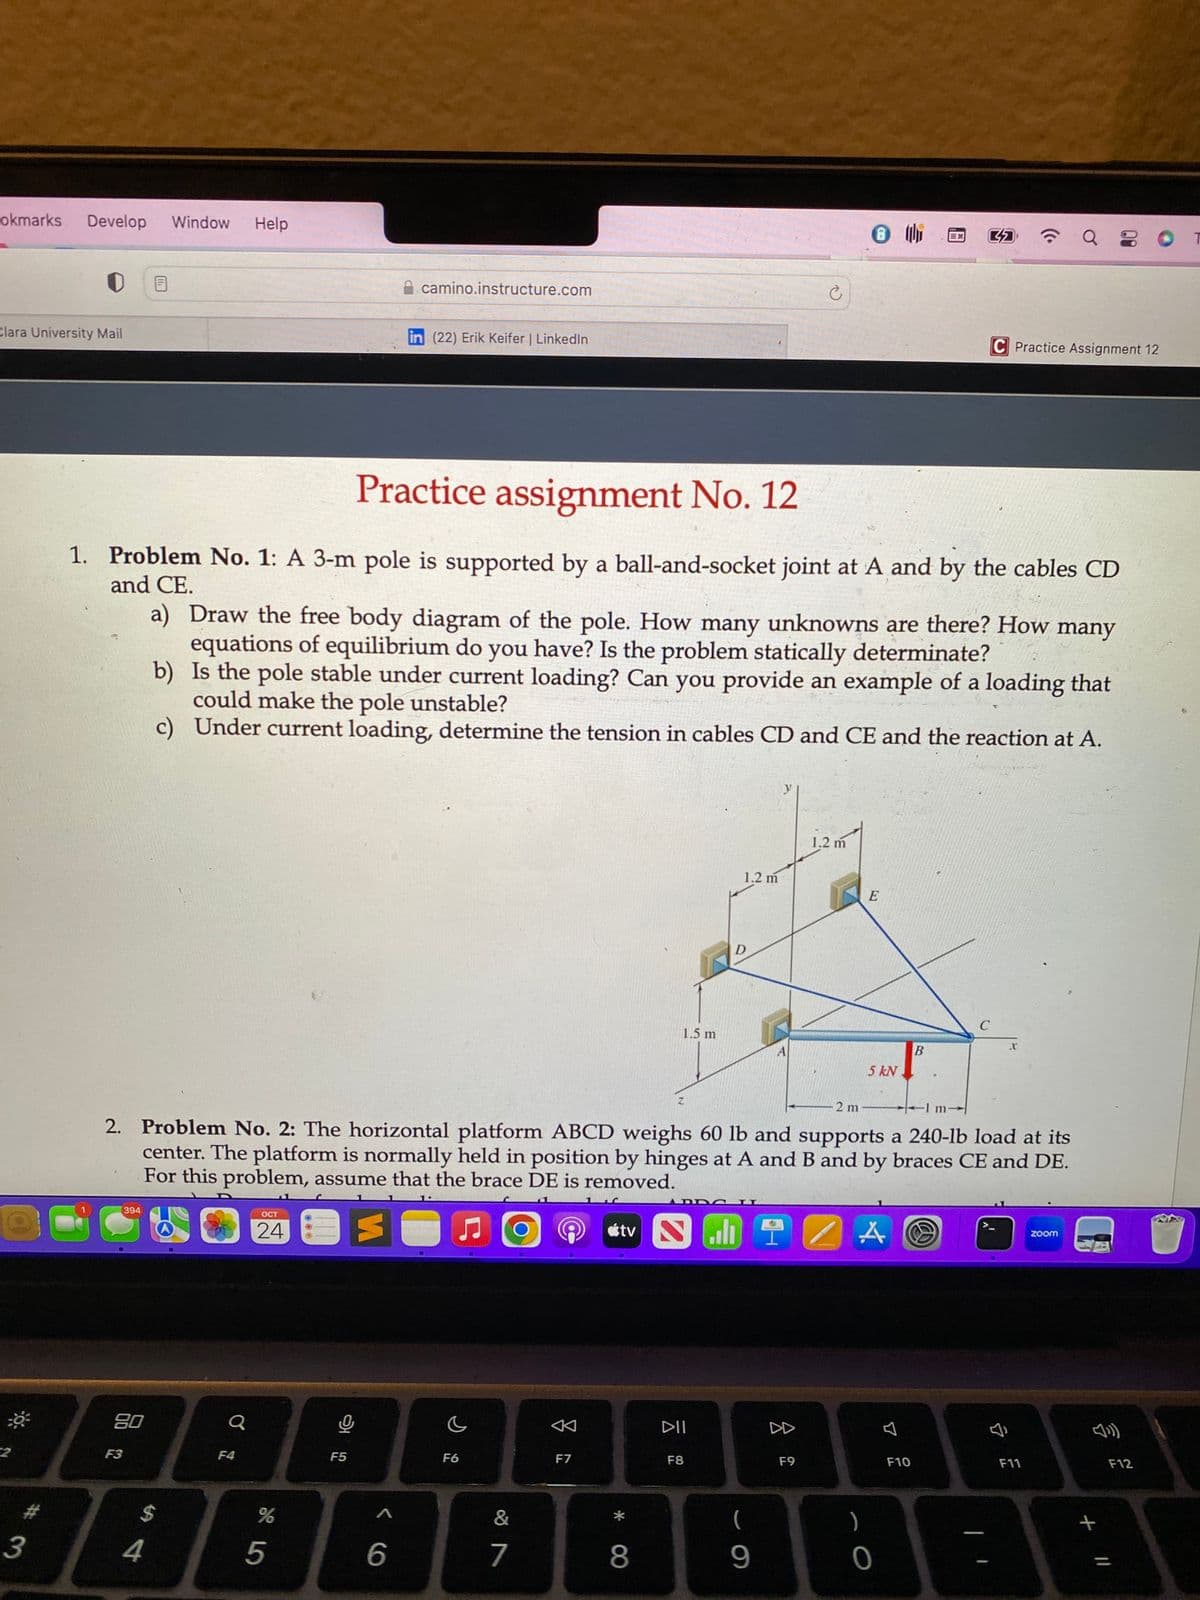 okmarks Develop Window Help
Clara University Mail
3
HE
394
80
F3
Practice assignment No. 12
1. Problem No. 1: A 3-m pole is supported by a ball-and-socket joint at A and by the cables CD
and CE.
$
4
a
F4
OCT
24
a) Draw the free body diagram of the pole. How many unknowns are there? How many
equations of equilibrium do you have? Is the problem statically determinate?
b)
Is the pole stable under current loading? Can you provide an example of a loading that
could make the pole unstable?
c) Under current loading, determine the tension in cables CD and CE and the reaction at A.
%
5
camino.instructure.com
F5
in (22) Erik Keifer | LinkedIn
A
6
-2 m
2. Problem No. 2: The horizontal platform ABCD weighs 60 lb and supports a 240-lb load at its
center. The platform is normally held in position by hinges at A and B and by braces CE and DE.
For this problem, assume that the brace DE is removed.
E
F6
&
7
F7
1.5 m
*
8
Z
tv Nall
1.2 m
D
ADDYO I
DII
F8
Ć
(
9
8
F9
8
1.2 m
E
5 kN
)
0
4
B
F10
C Practice Assignment 12
C
m
a
F11
zoom
+ 11
F12